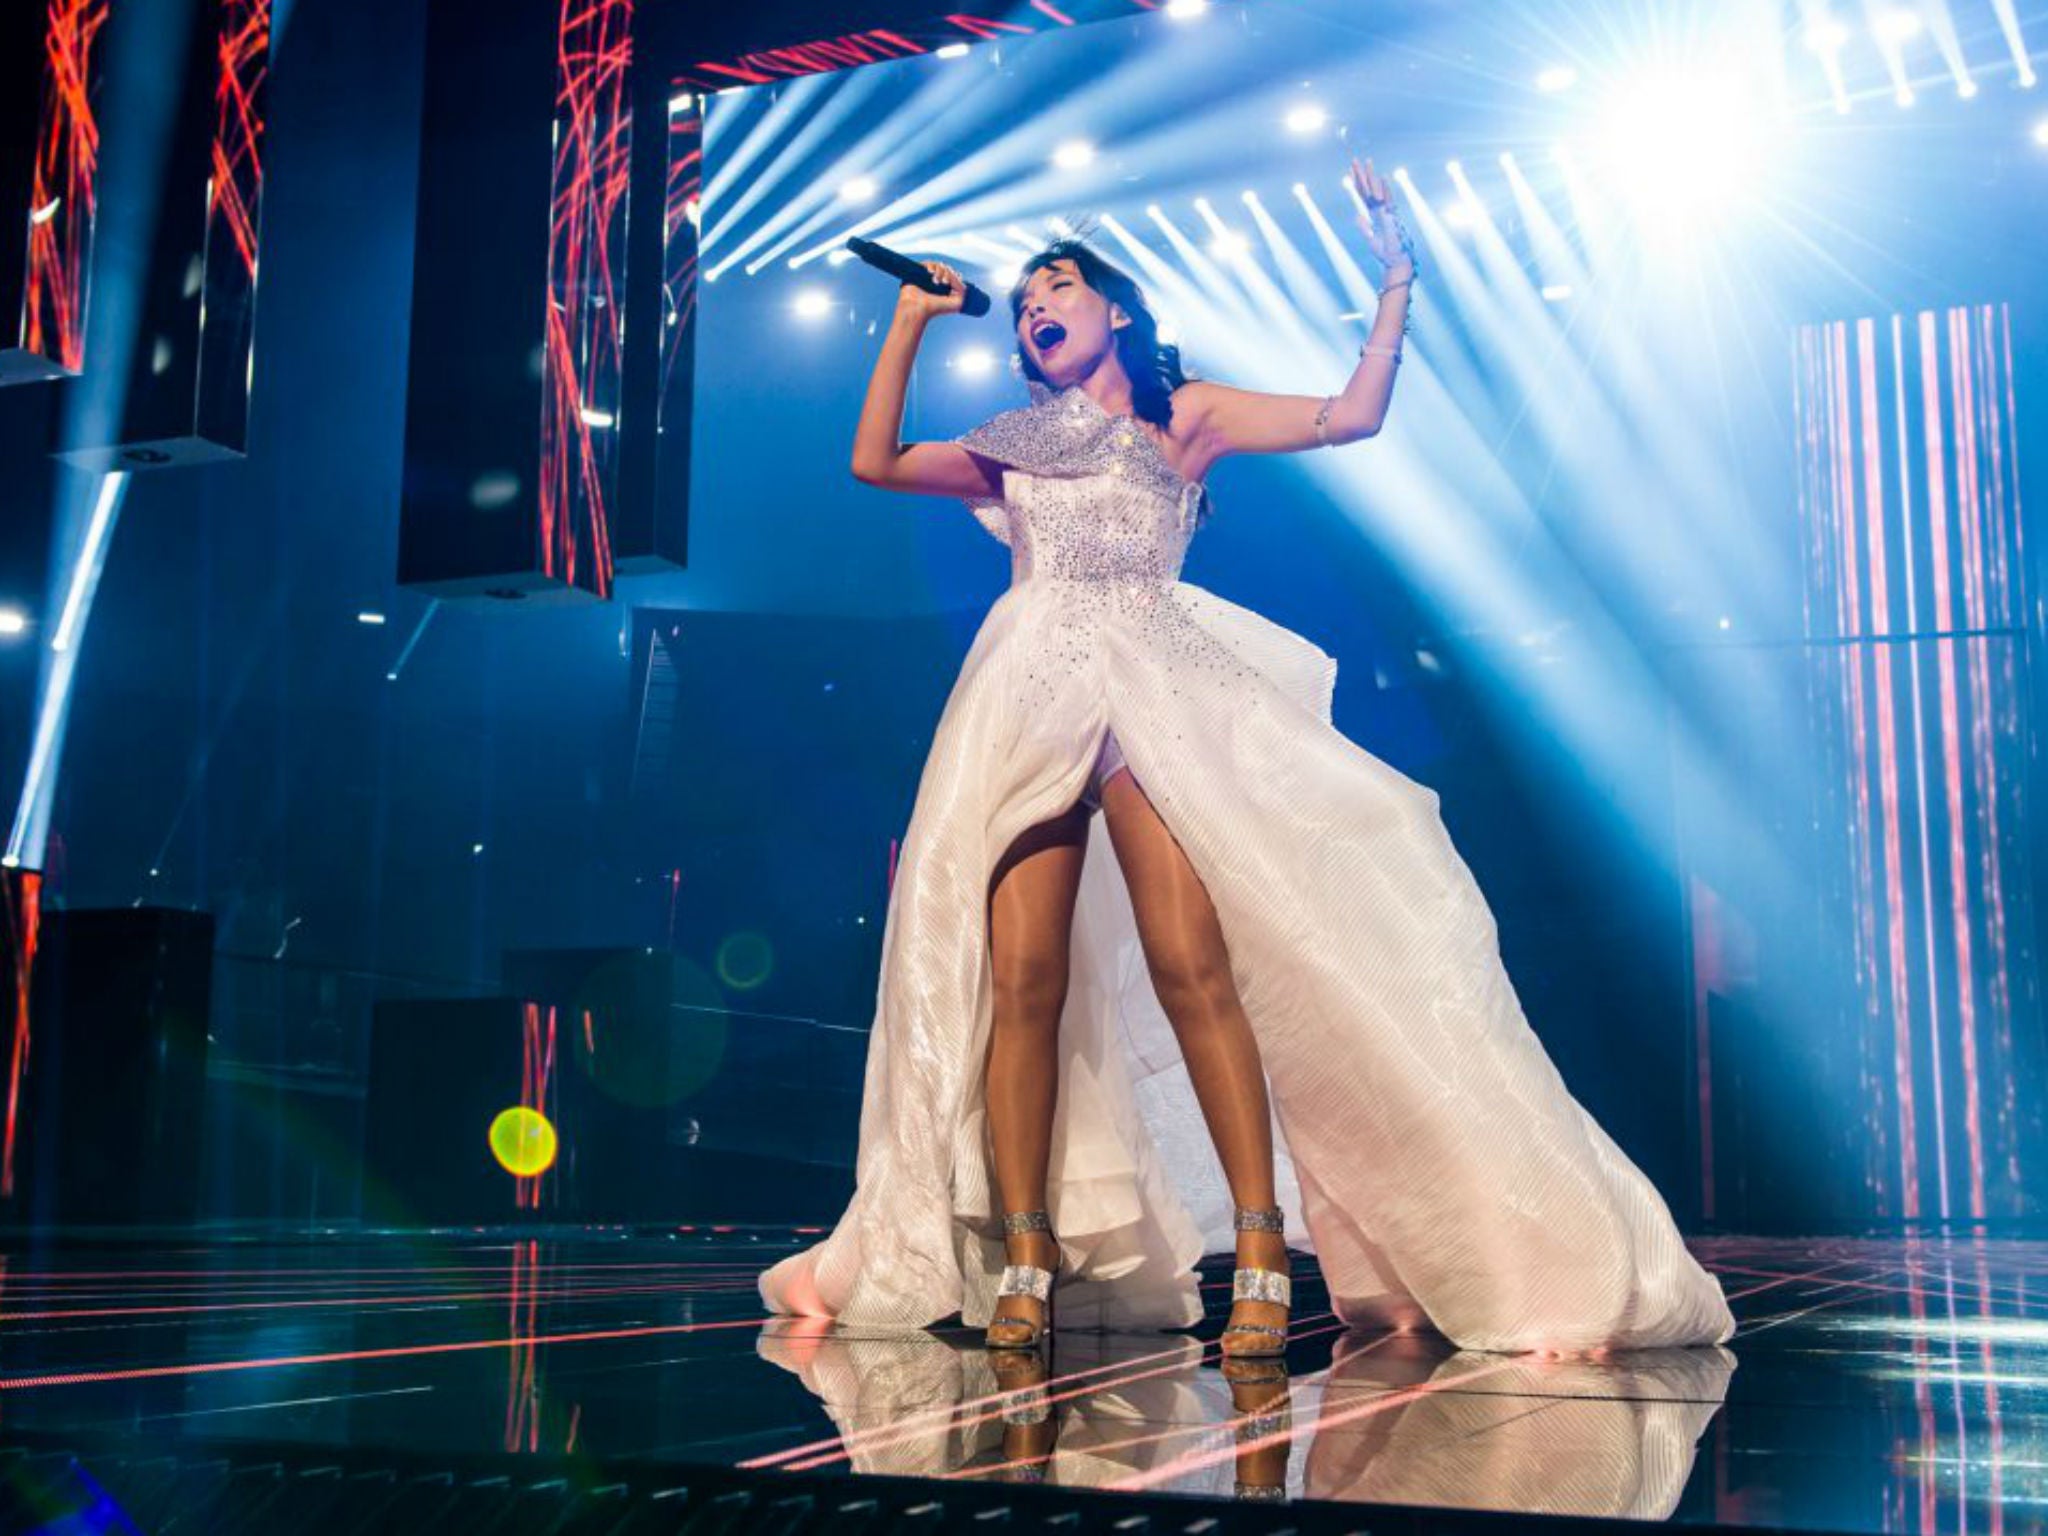 Dami Im performs 'Sound of Silence' for Australia in the second semi final dress rehearsal